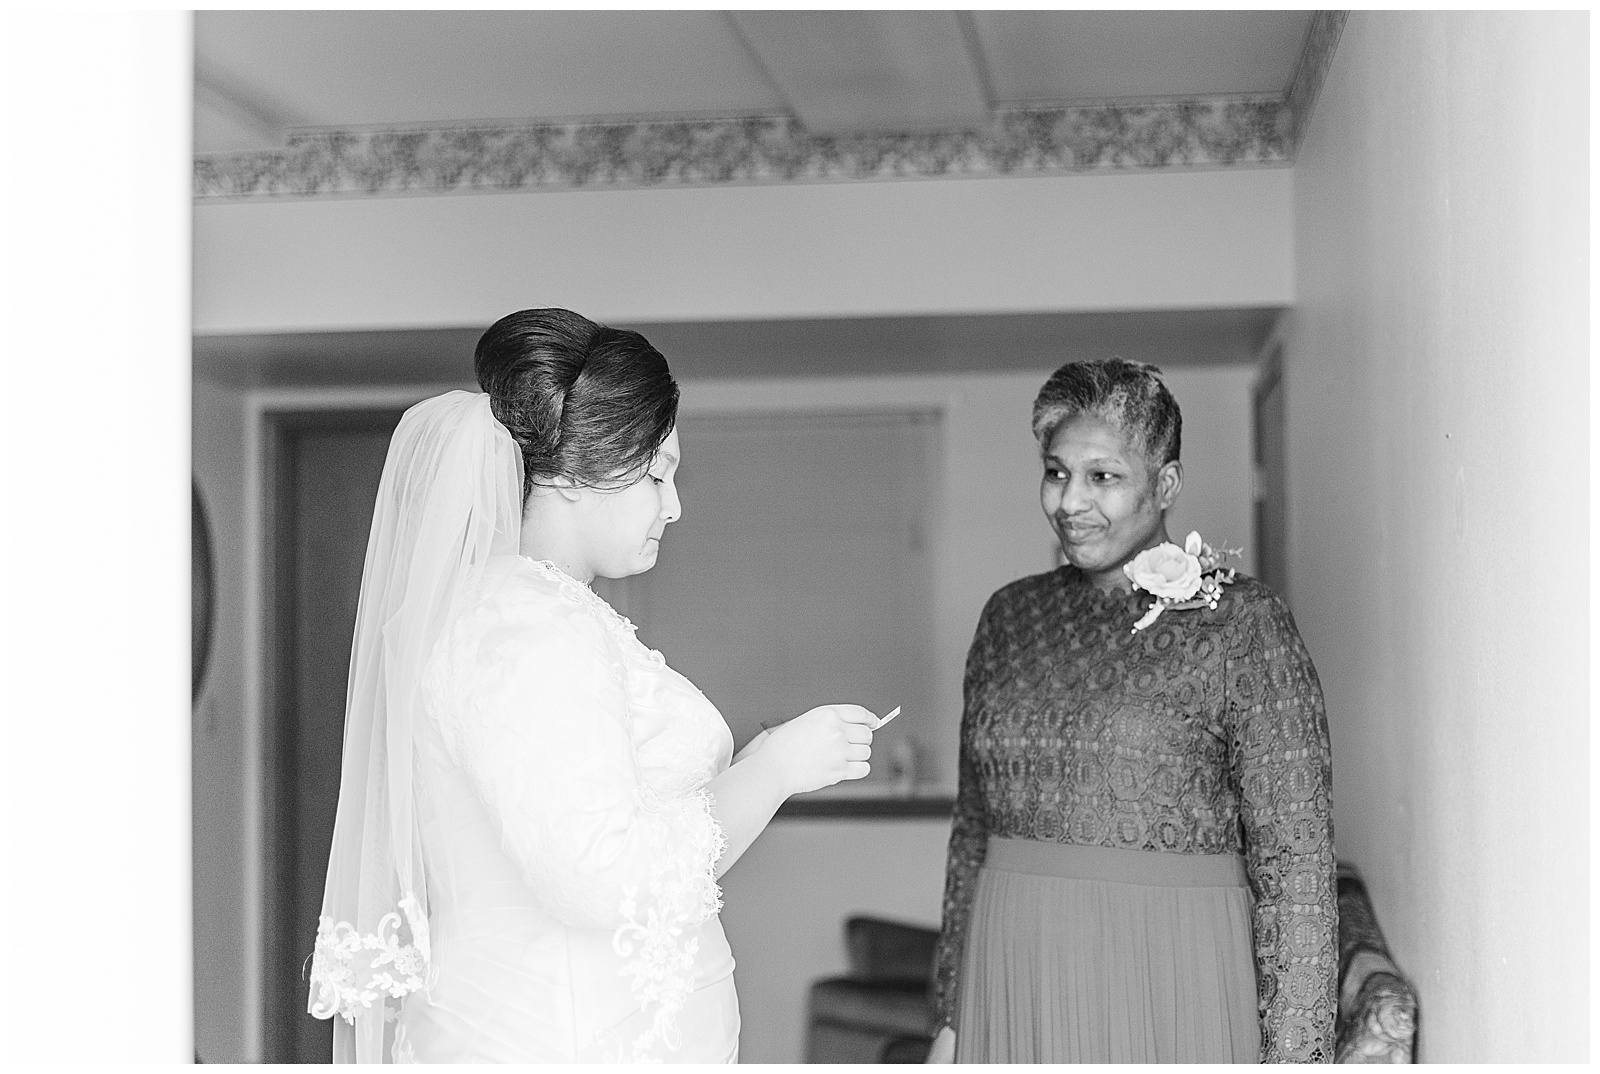 Mother of bride giving bride a gift